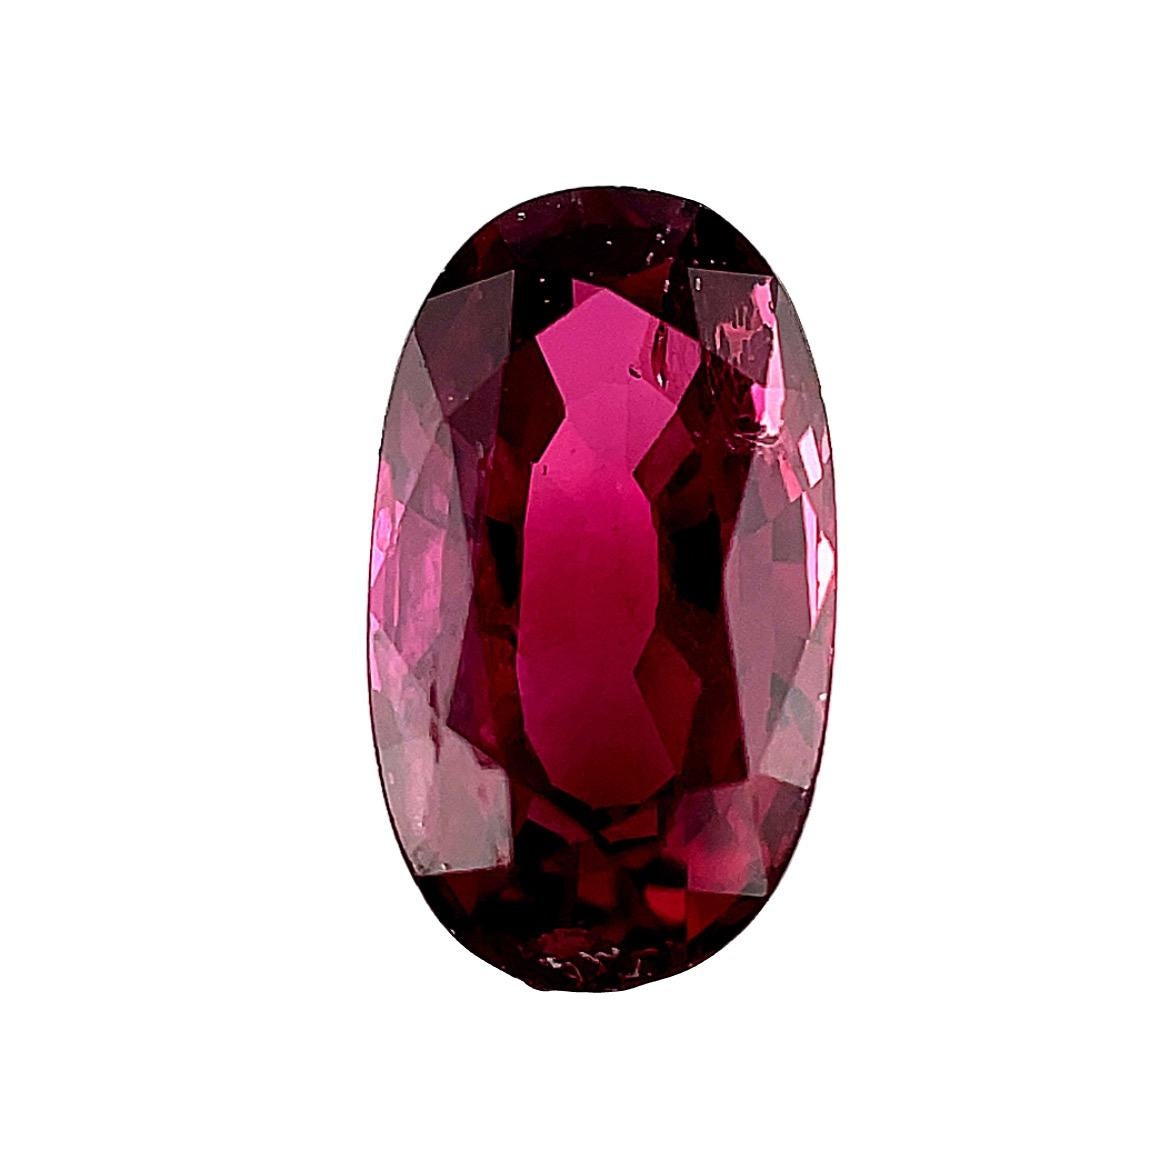 Loose Ruby Gemstone for Engagement or 3-Stone Ring, 1.46 Carat Oval  For Sale 4